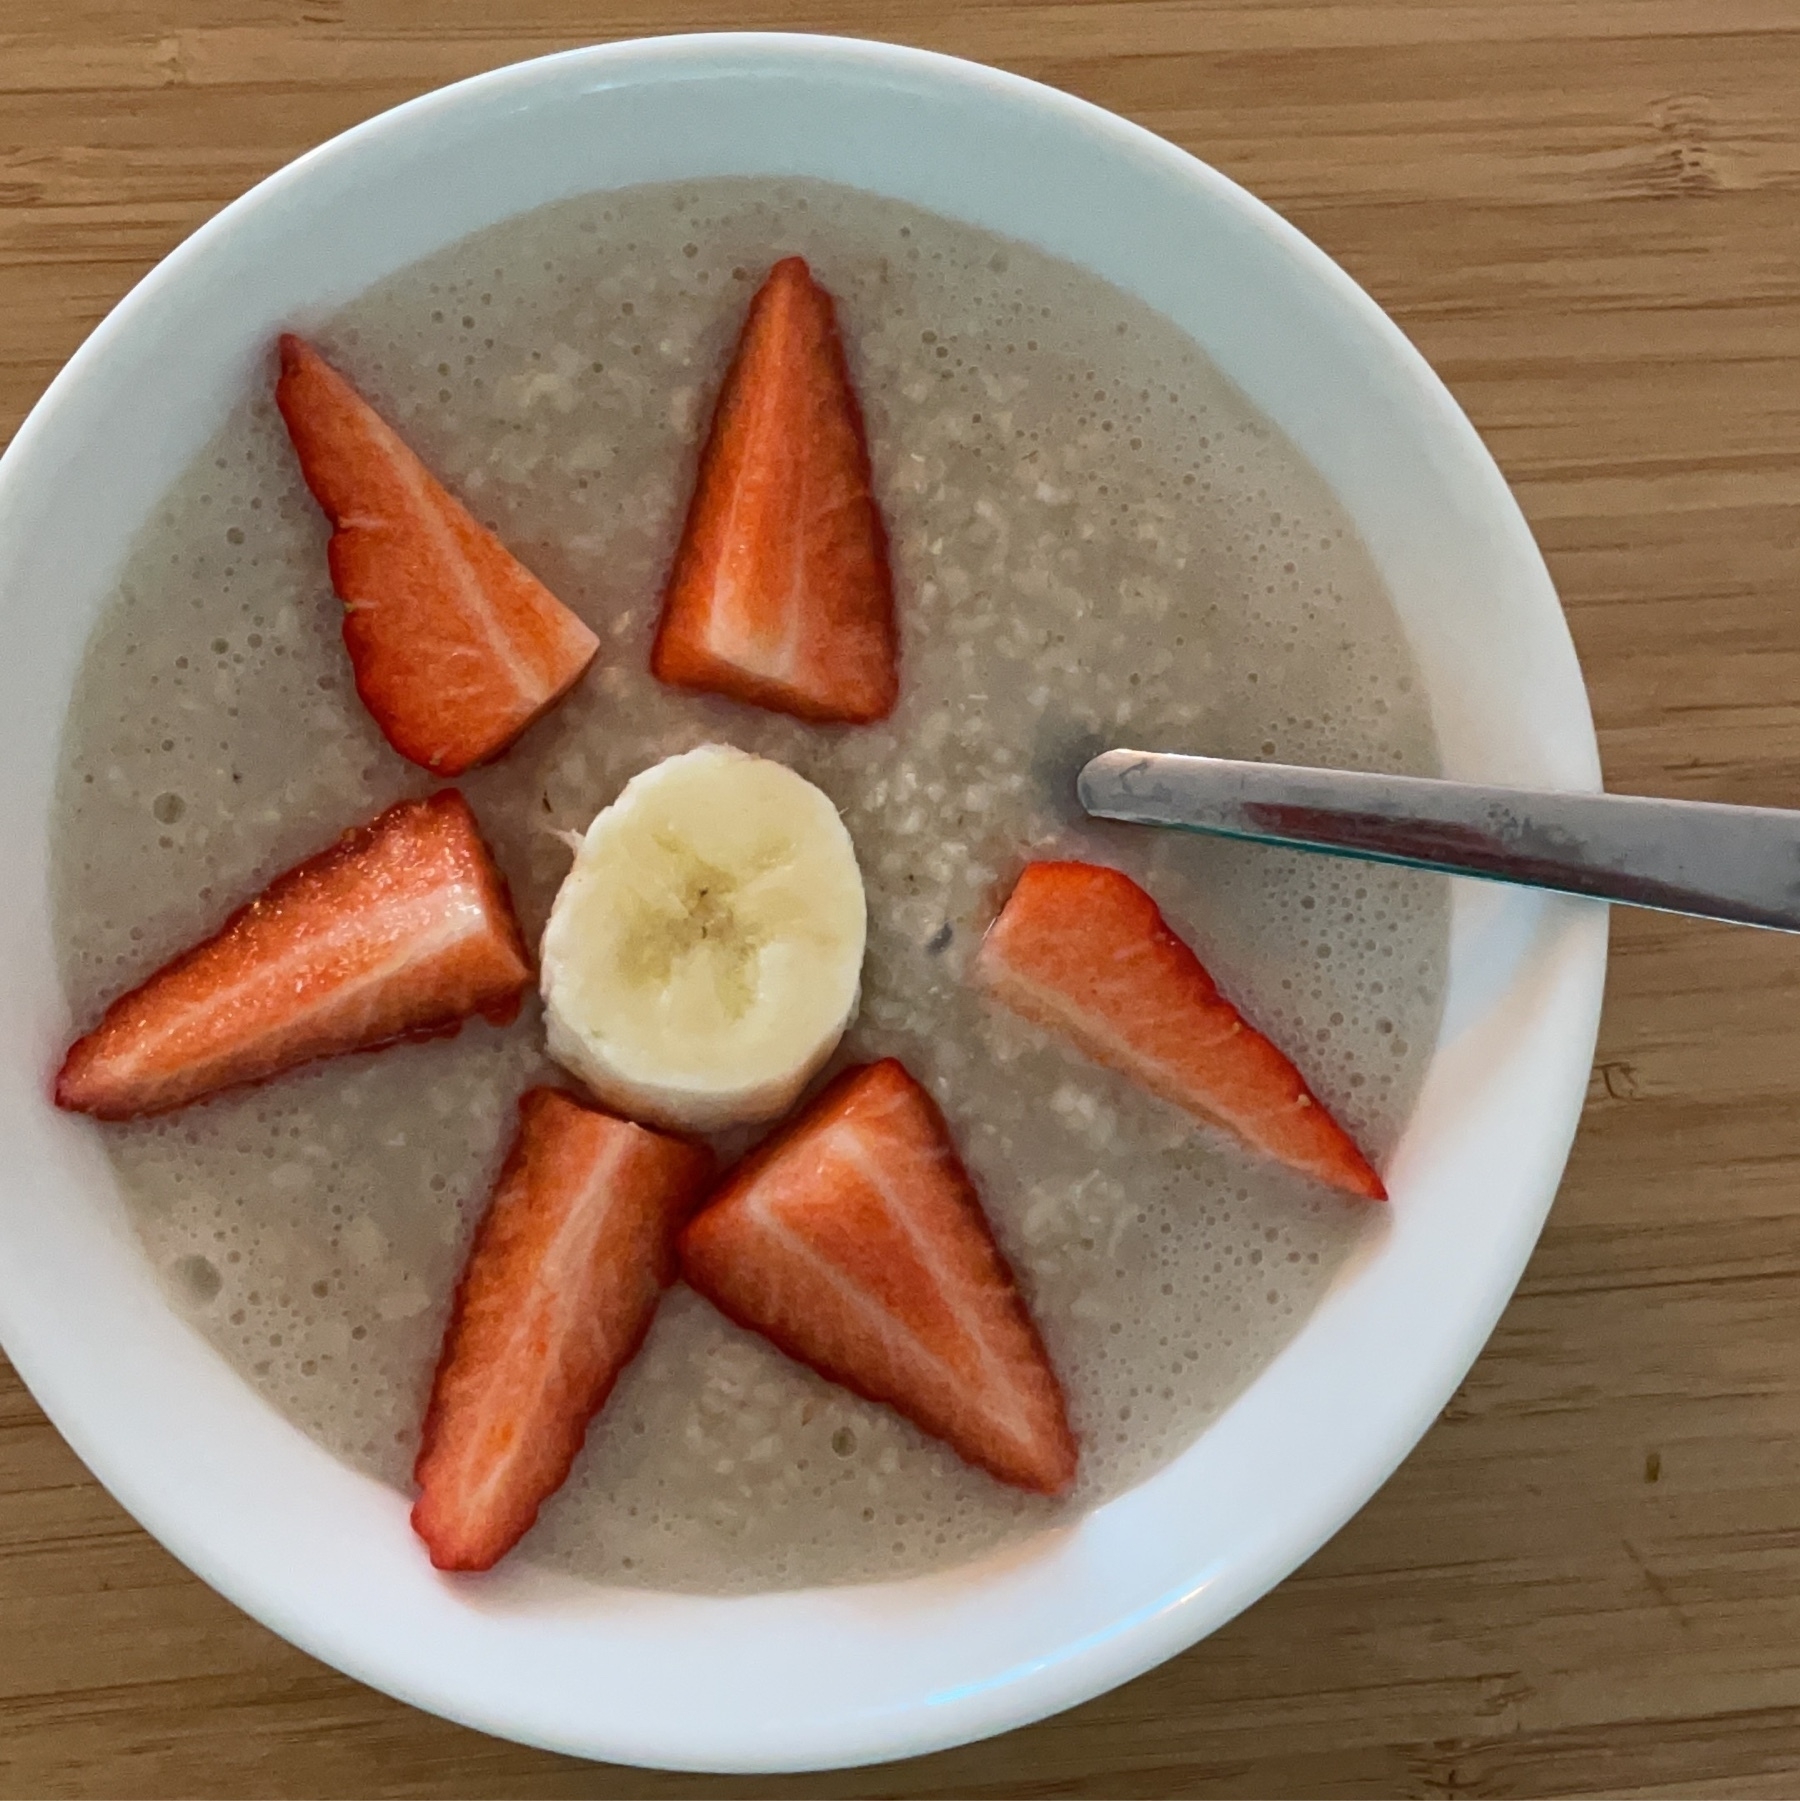 porridge with strawberries laid down in flower shape with a slice of banana in the middle